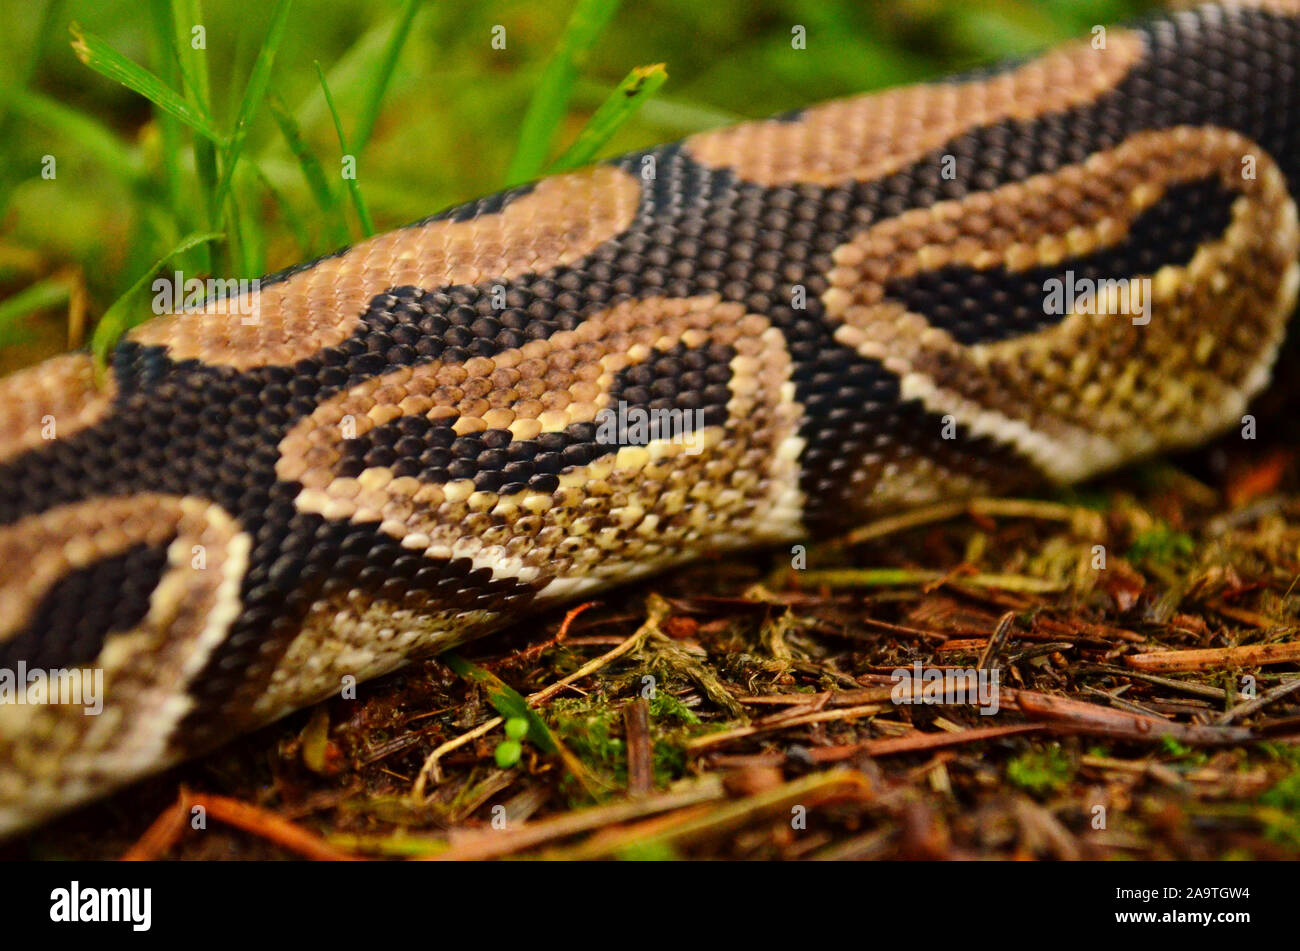 Ball python's scales and body Stock Photo